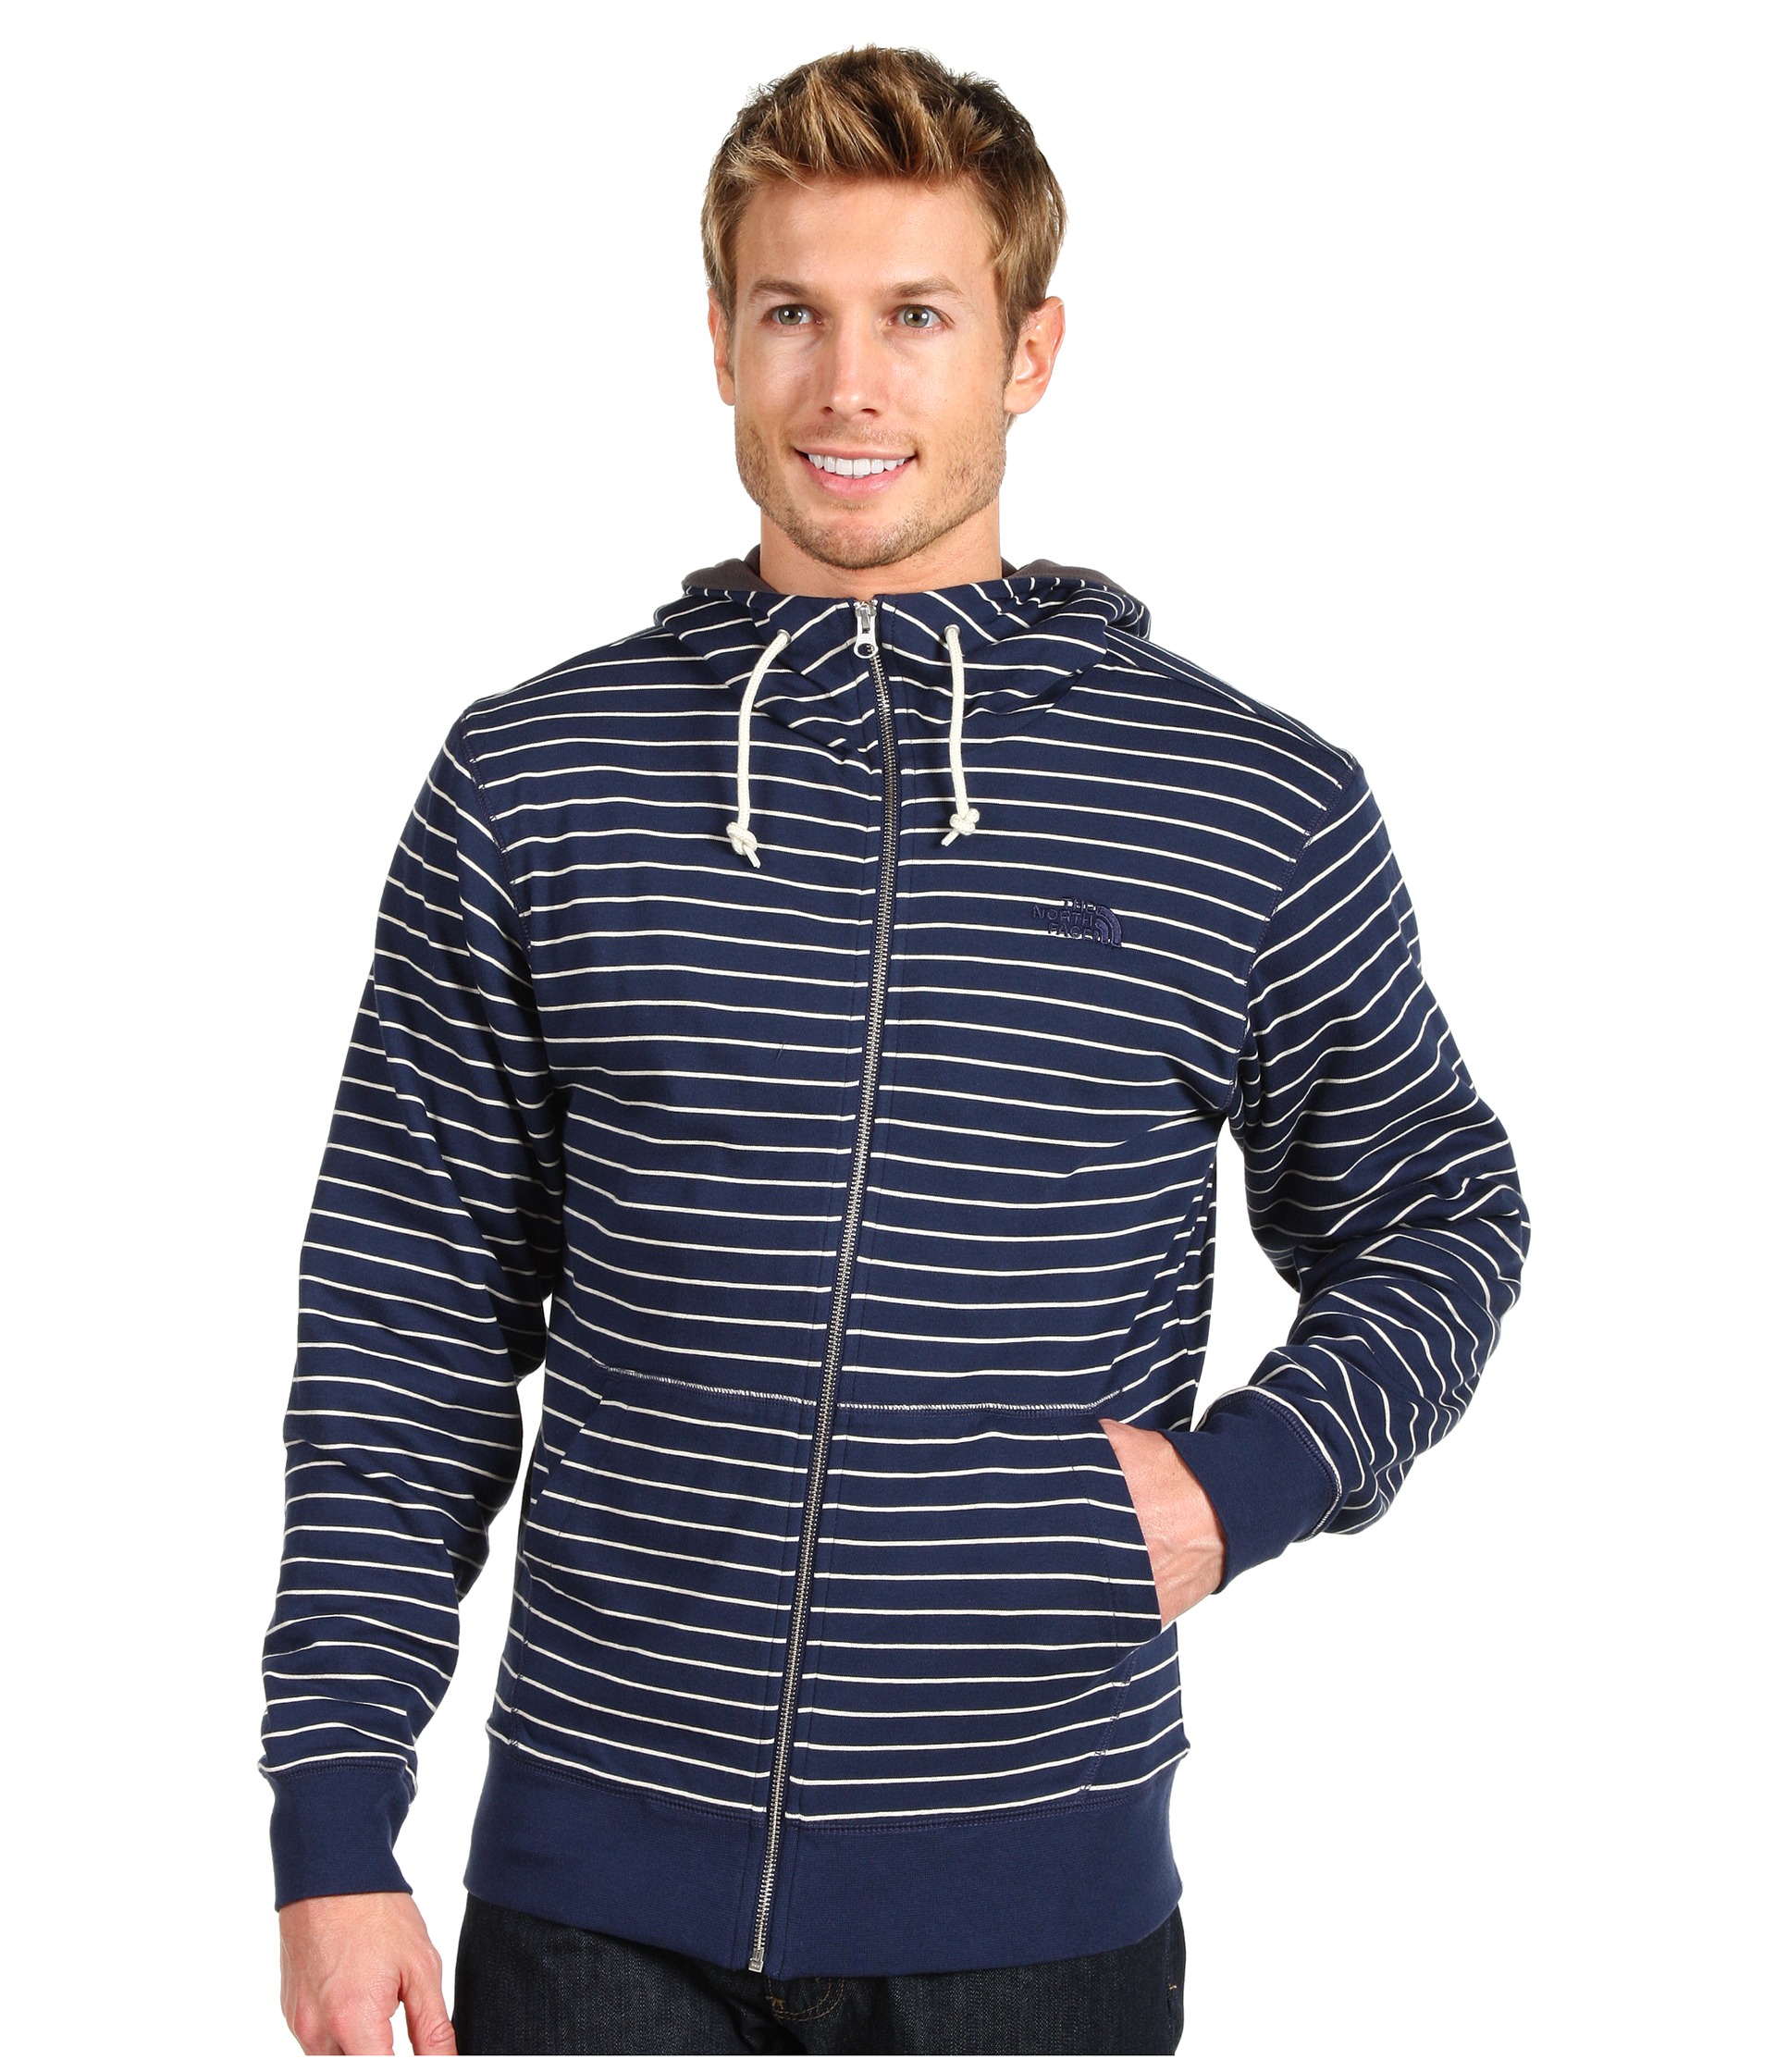 The North Face Mens Striped Tanmanmac Full Zip Hoodie $90.00 Rated 5 